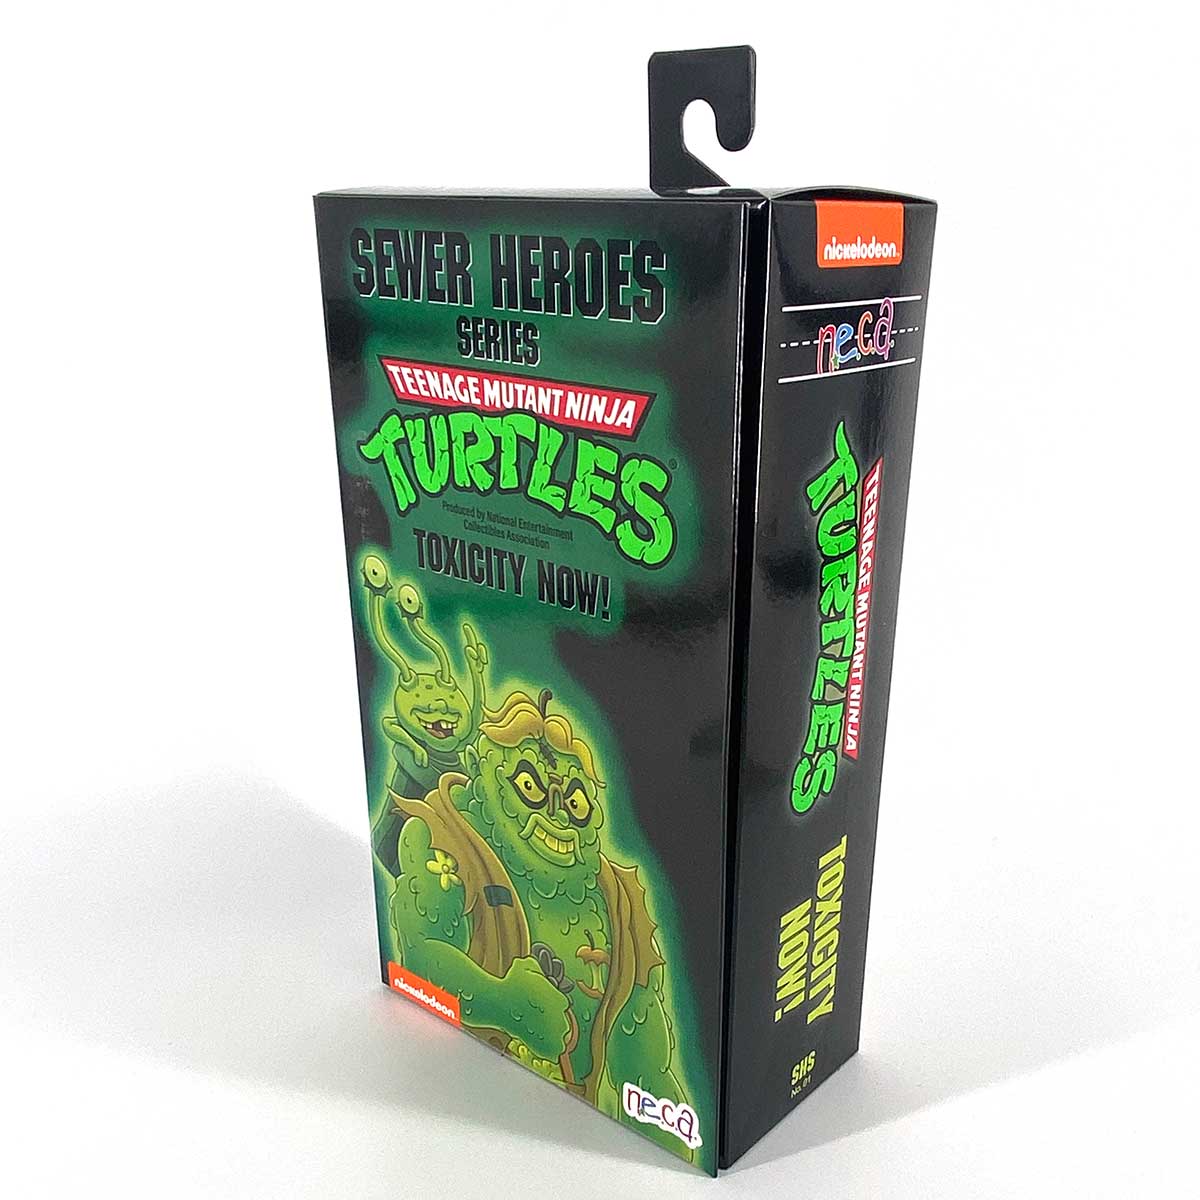 NECA TMNT Muckman and Eyeball Glow In The Dark with Turtle Headsketch  Remarque – Toxicity Now!!! – Kevin Eastman Studios